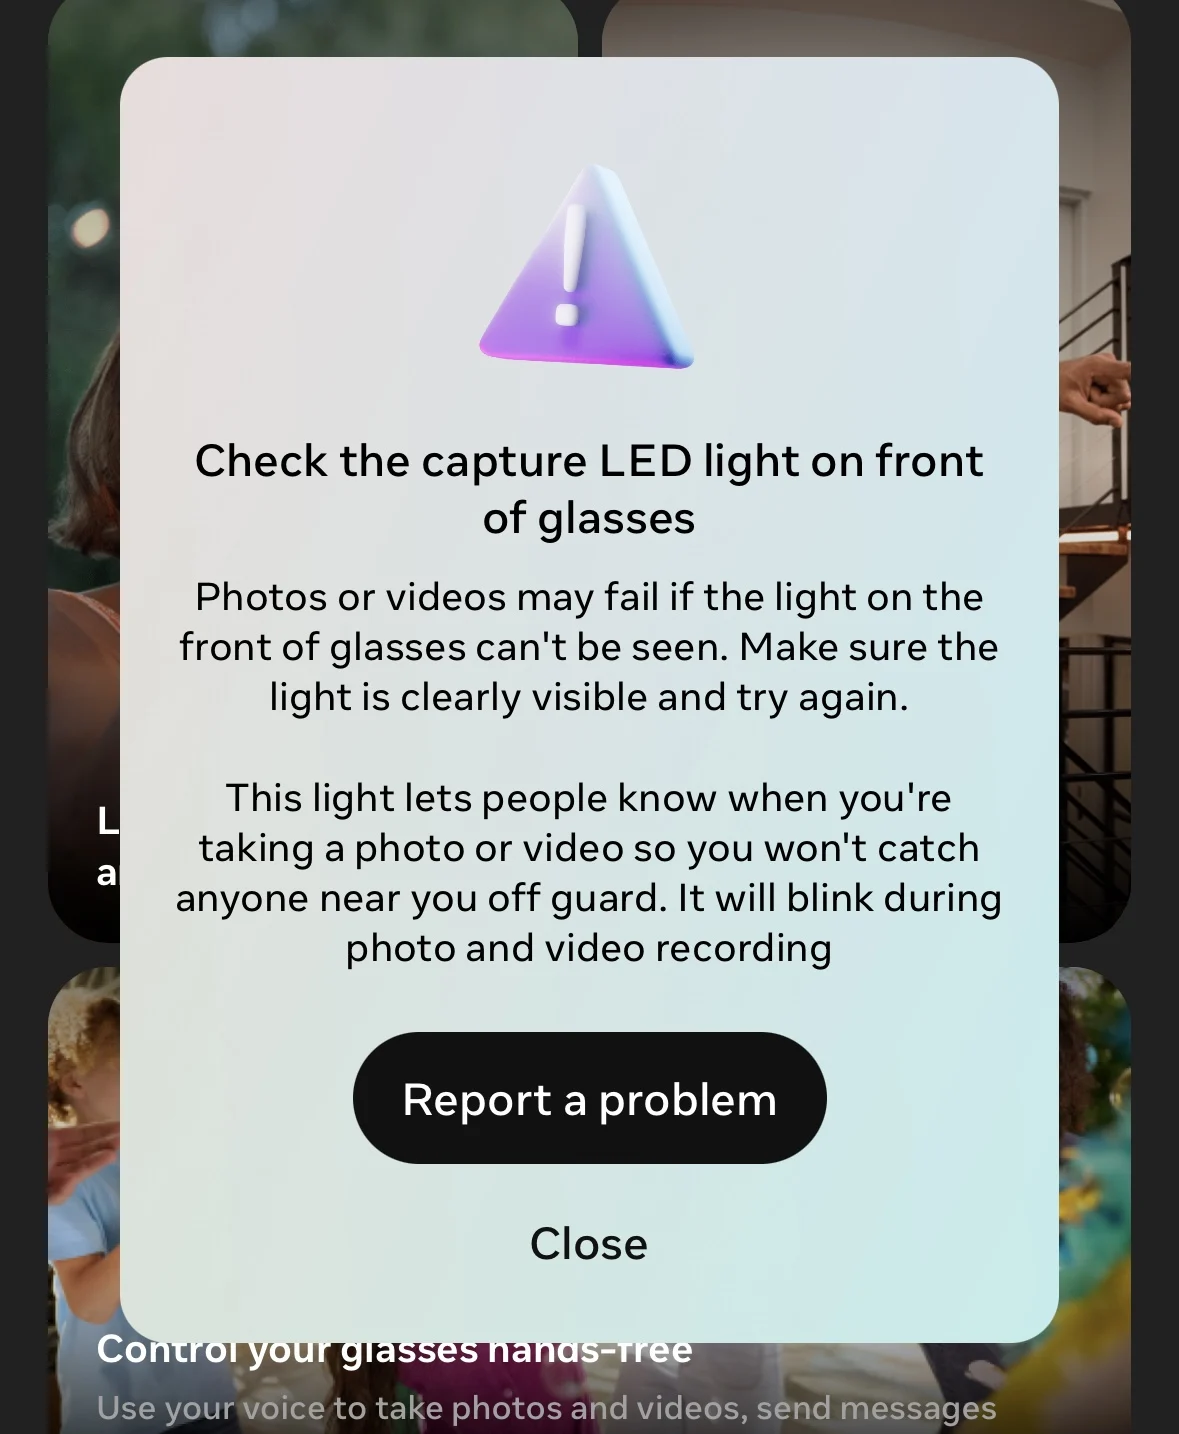 If you try to cover or block the LED, the glasses won't capture new photos or videos.